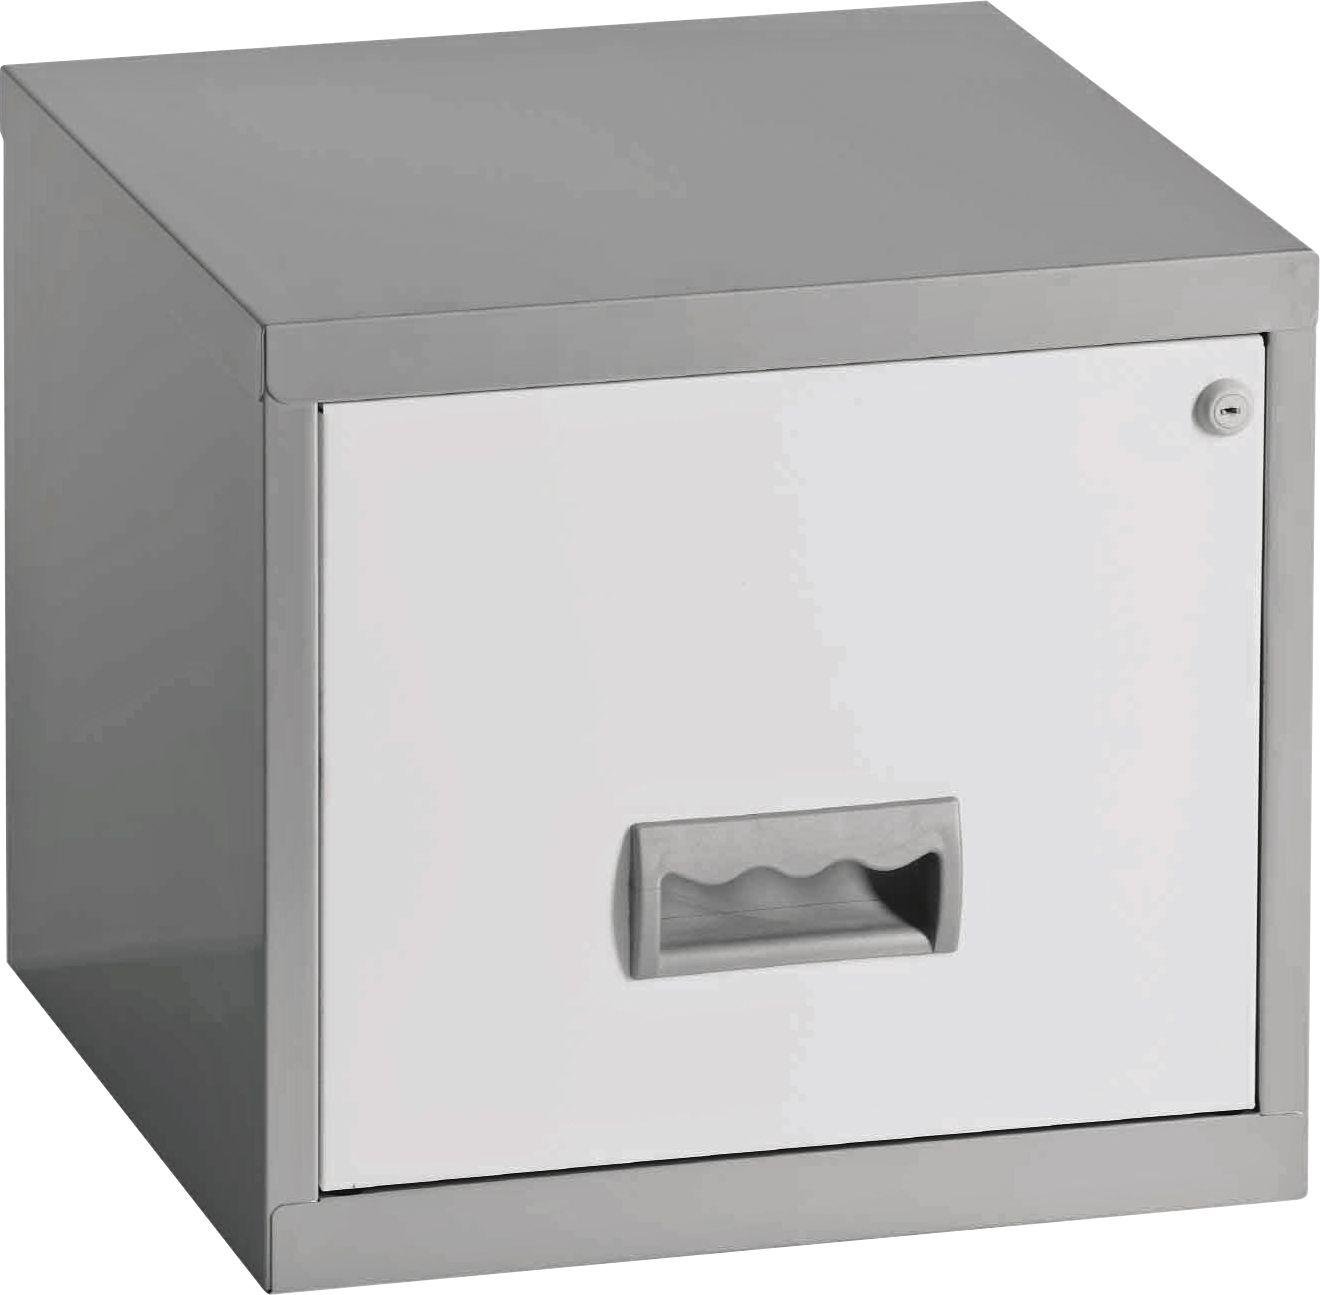 Pierre Henry 1 Drawer Filing Cabinet - Silver/White